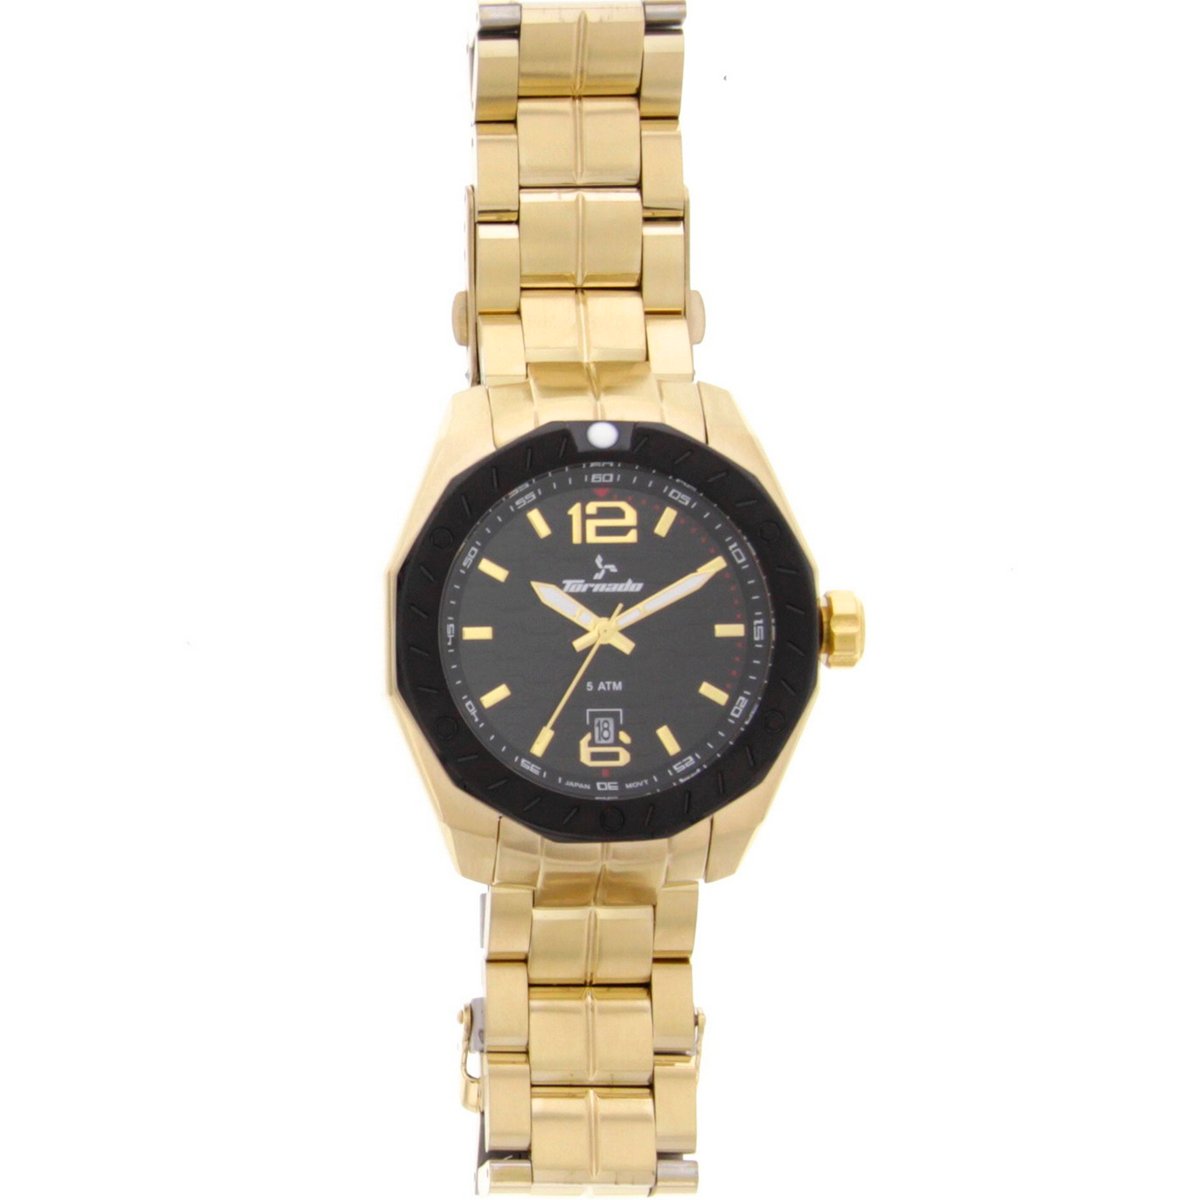 Tornado Men's Analog Watch Black Dial Stainless Steel Gold Band T5023-GBGB